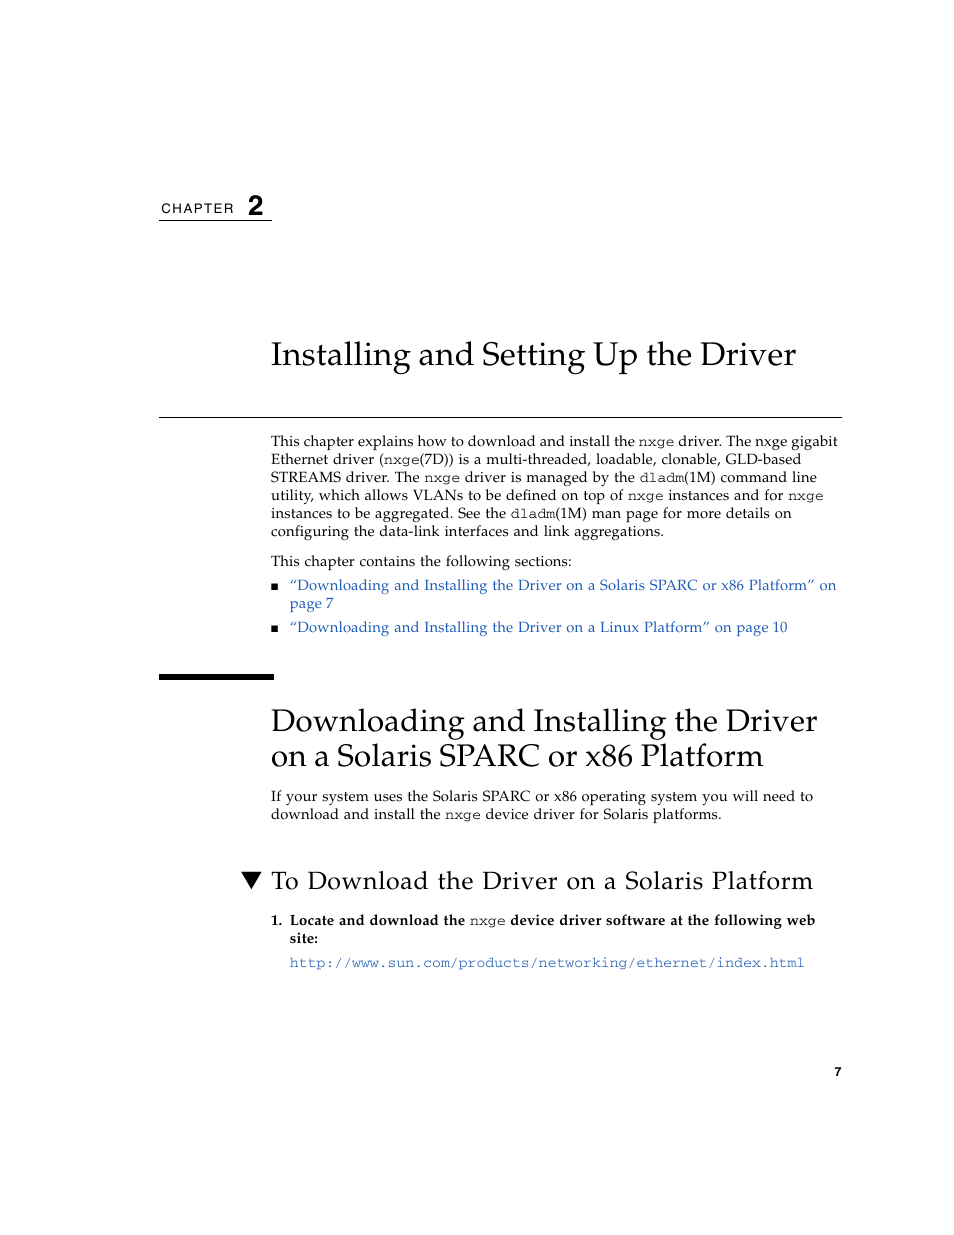 Installing and setting up the driver, To download the driver on a solaris platform | Oracle Audio Technologies Sun Oracle SunDual 10GbE XFP User Manual | Page 17 / 86